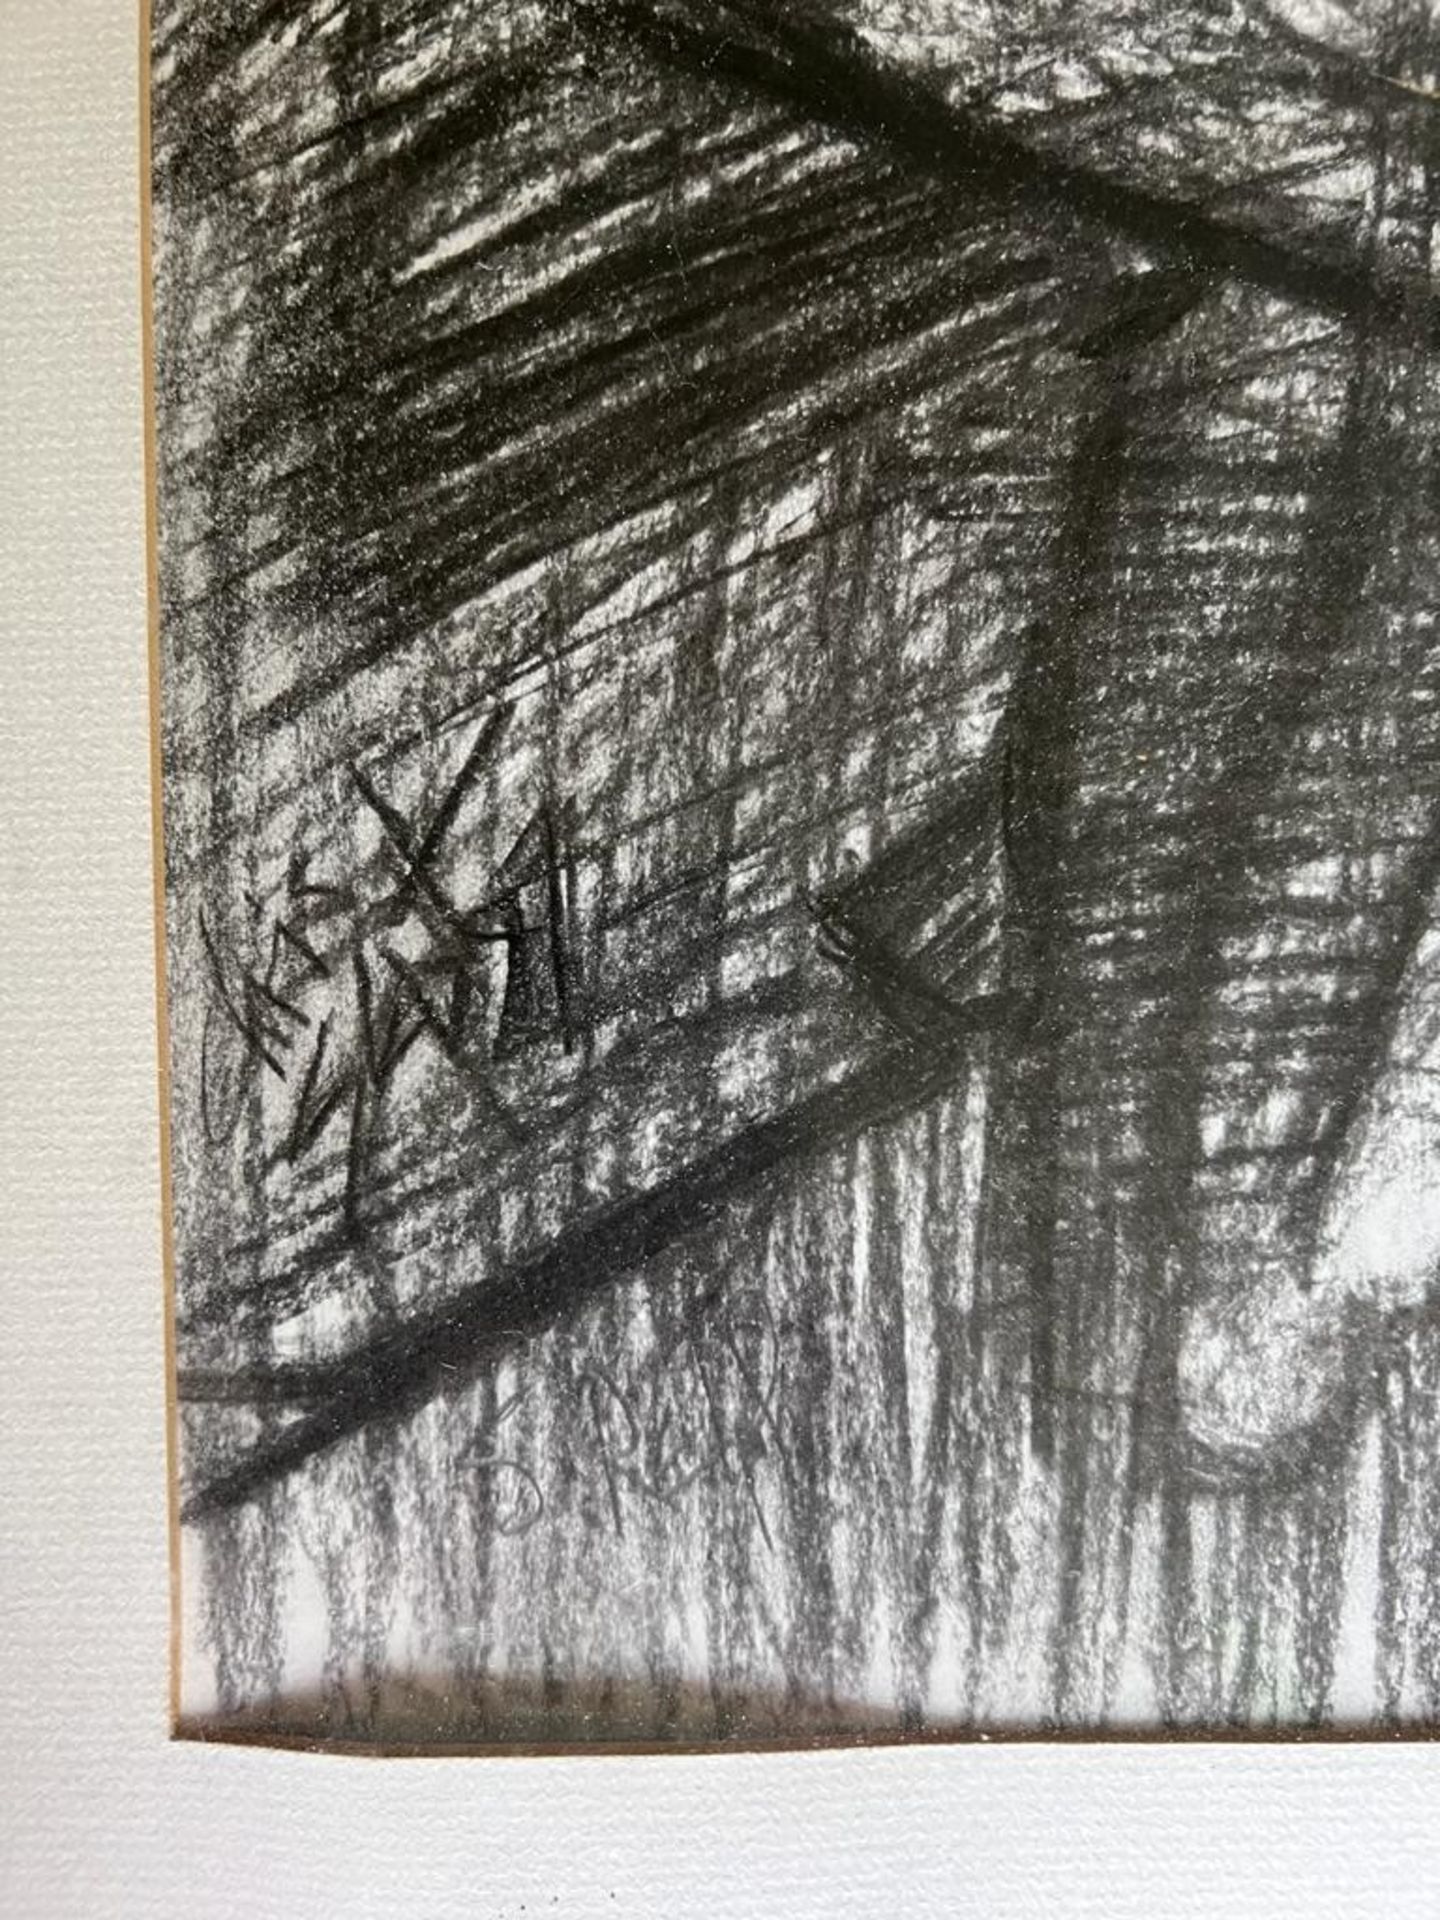 S RELPH, CHARCOAL DRAWING, 'CONTEMPLATION', SIGNED LOWER LEFT, FRAMED AND GLAZED, APPROX 182 x 57. - Image 2 of 2